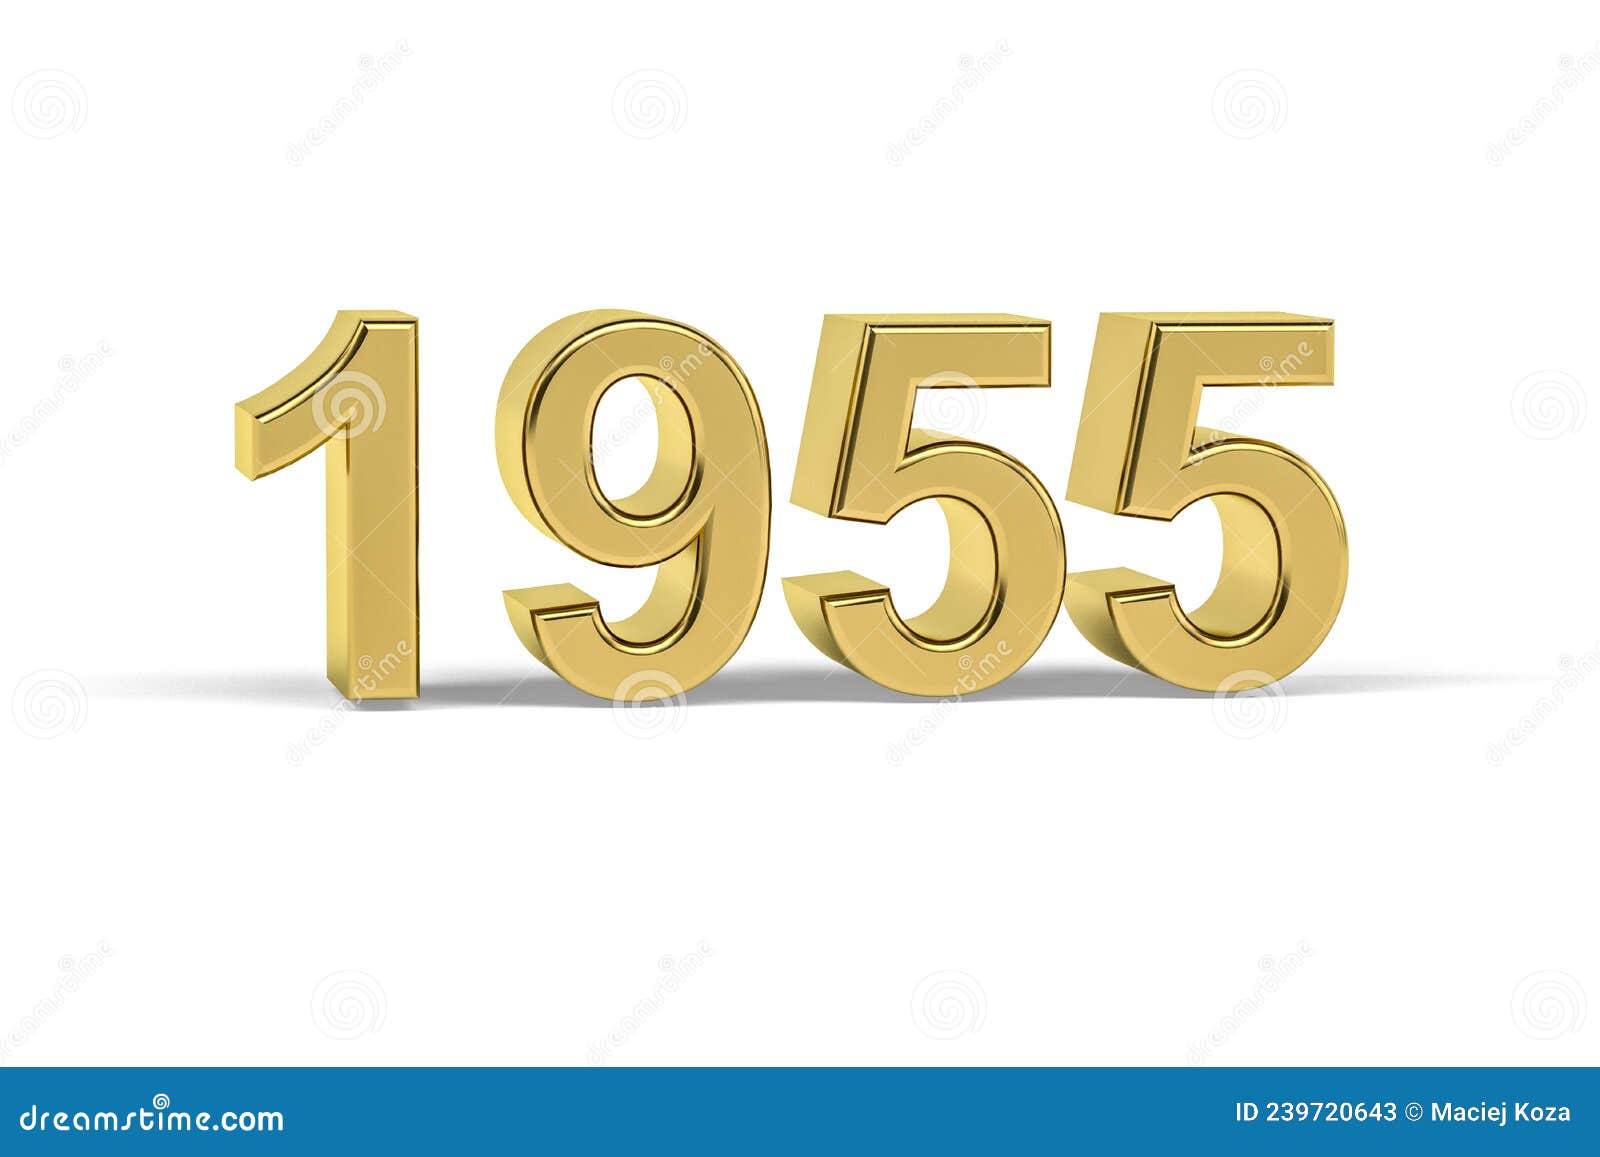 Golden 3d Number 1955 - Year 1955 Isolated on White Background ...